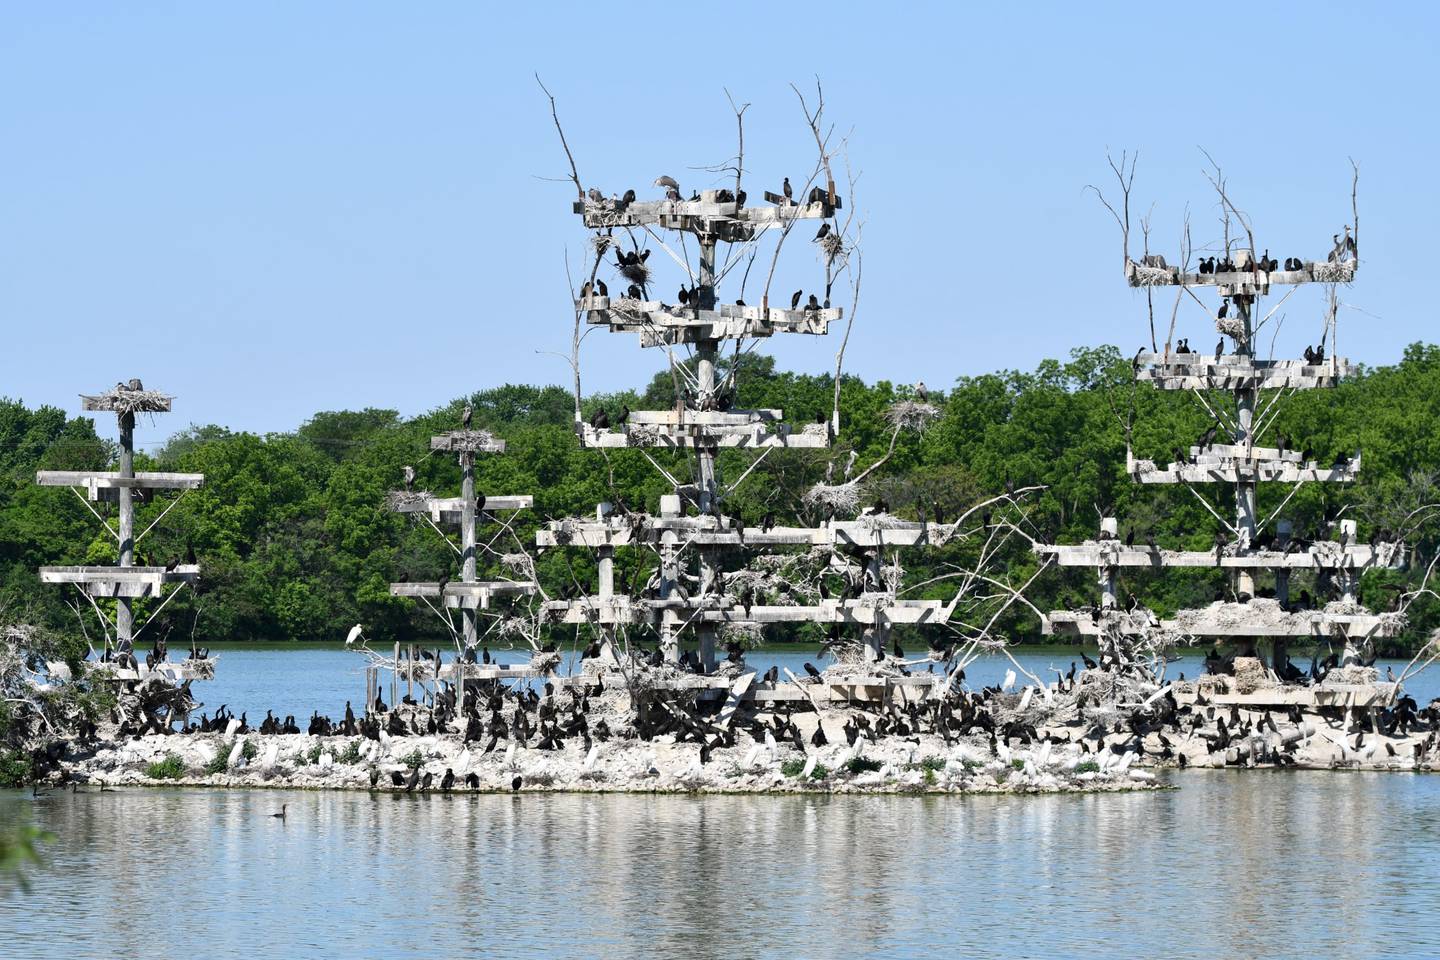 View nesting birds during a Lake Renwick Migratory Bird Viewing program on Saturday, July 8, 2023 at the Forest Preserve District of Will County’s Lake Renwick Heron Rookery Nature Preserve in Plainfield.